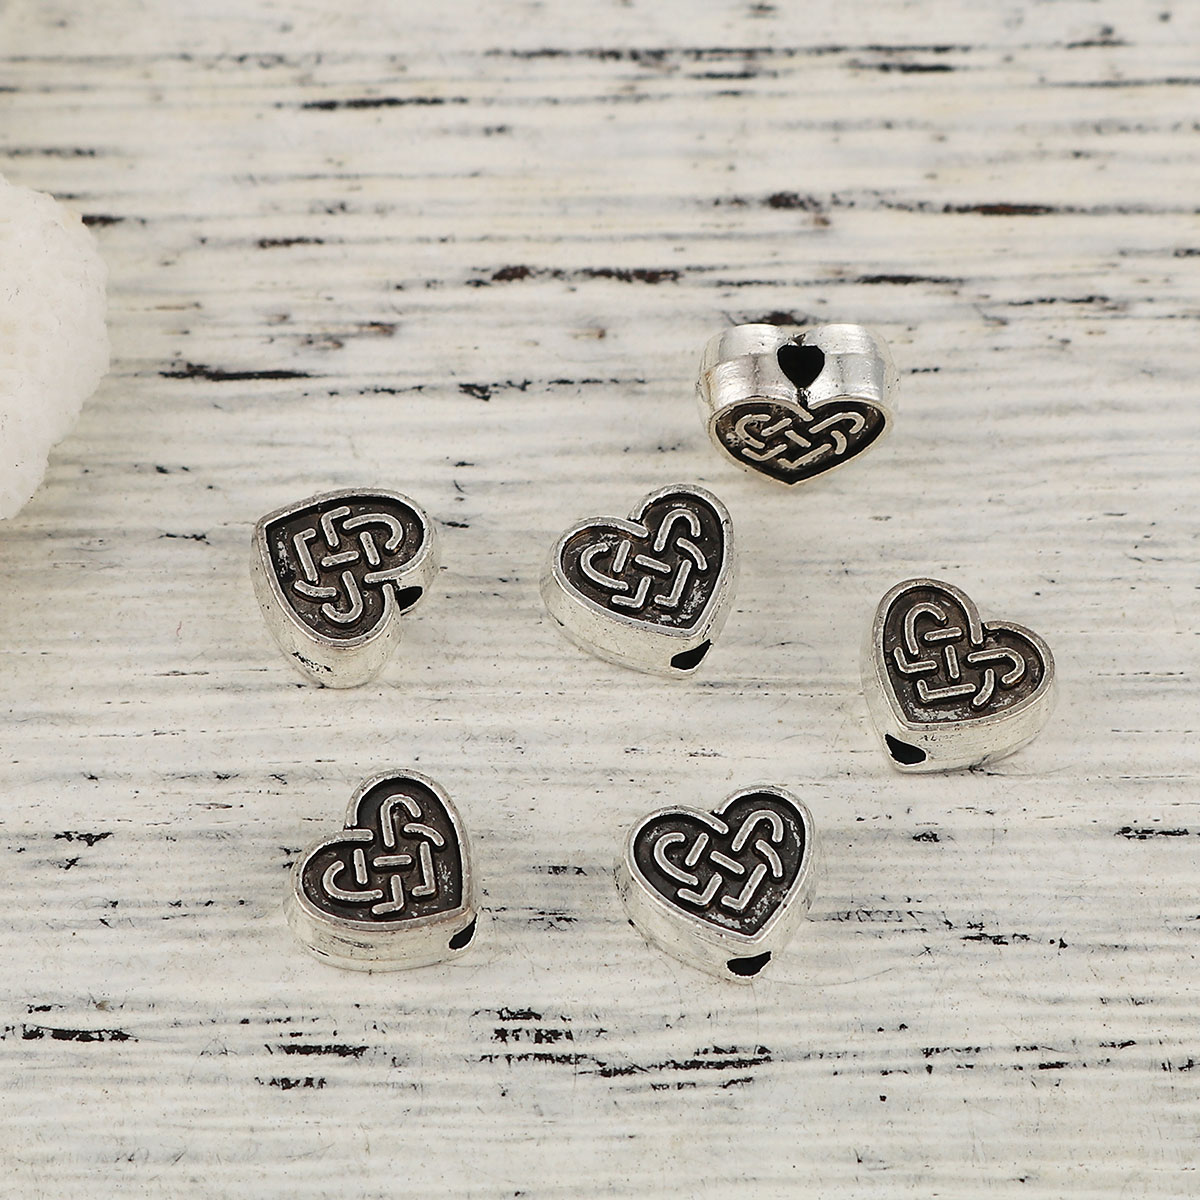 Picture of Zinc Based Alloy Spacer Beads Heart Antique Silver Carved 9mm x 8mm, Hole: Approx 2mm, 50 PCs